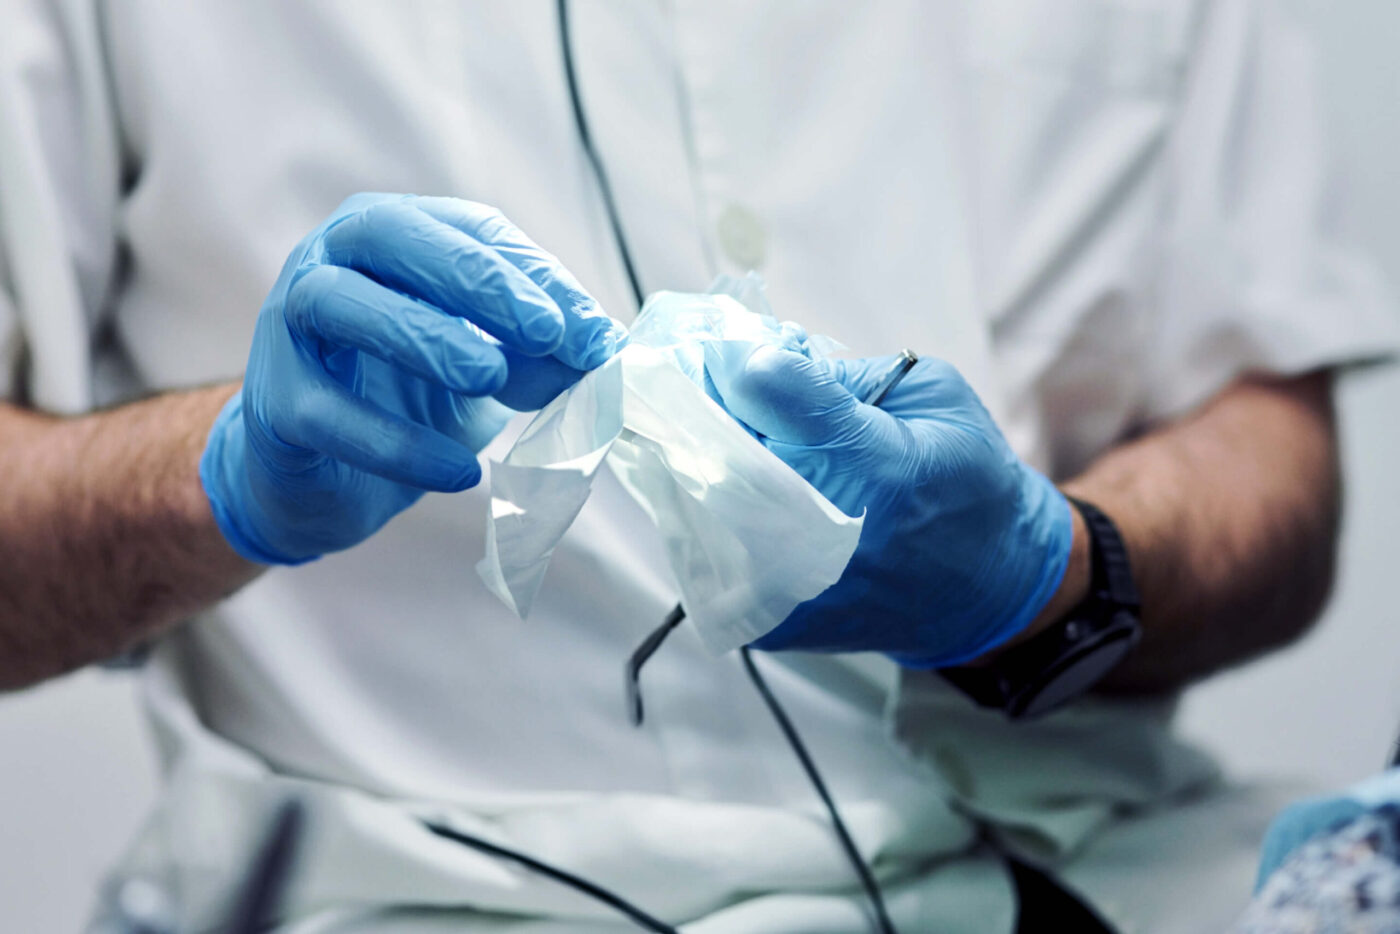 Man in medical gloves cleaning some plastic